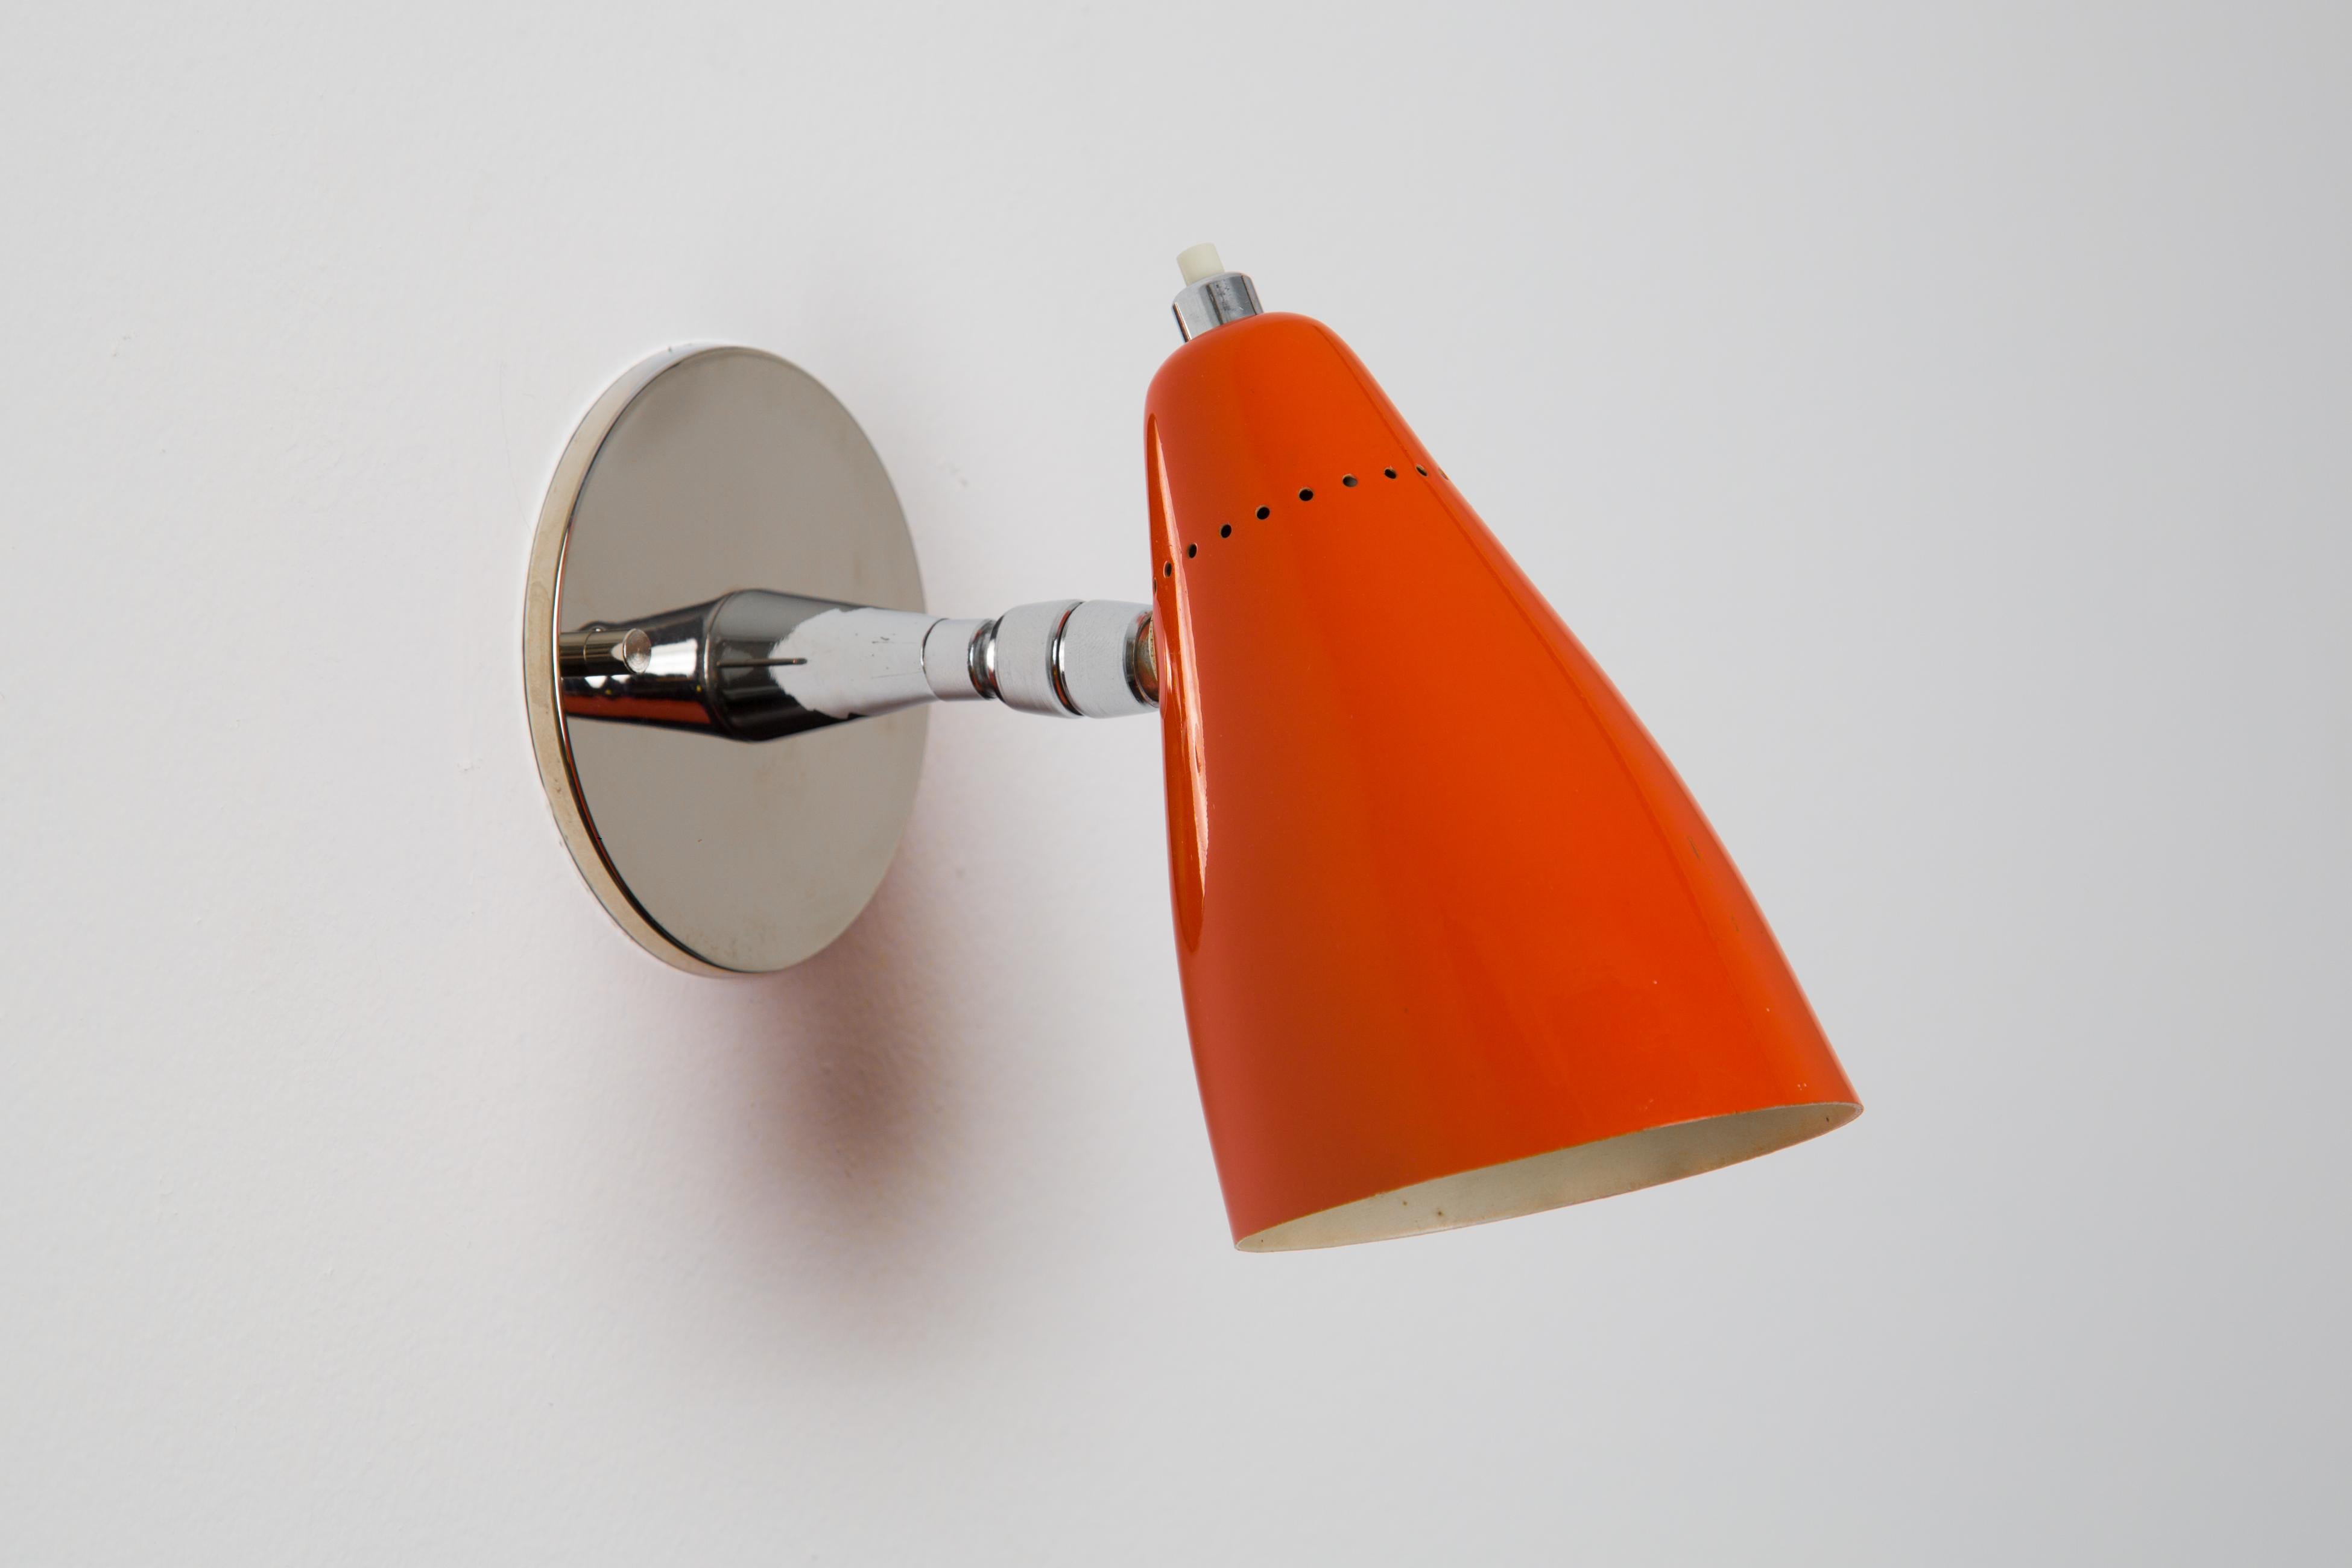 1960s Giuseppe Ostuni Model #101 orange articulating sconce for O-Luce. Executed in polished chrome and a orange painted perforated aluminum shade. Sconce pivots up/down and left/right. An incredibly clean and refined design by one of the Italian